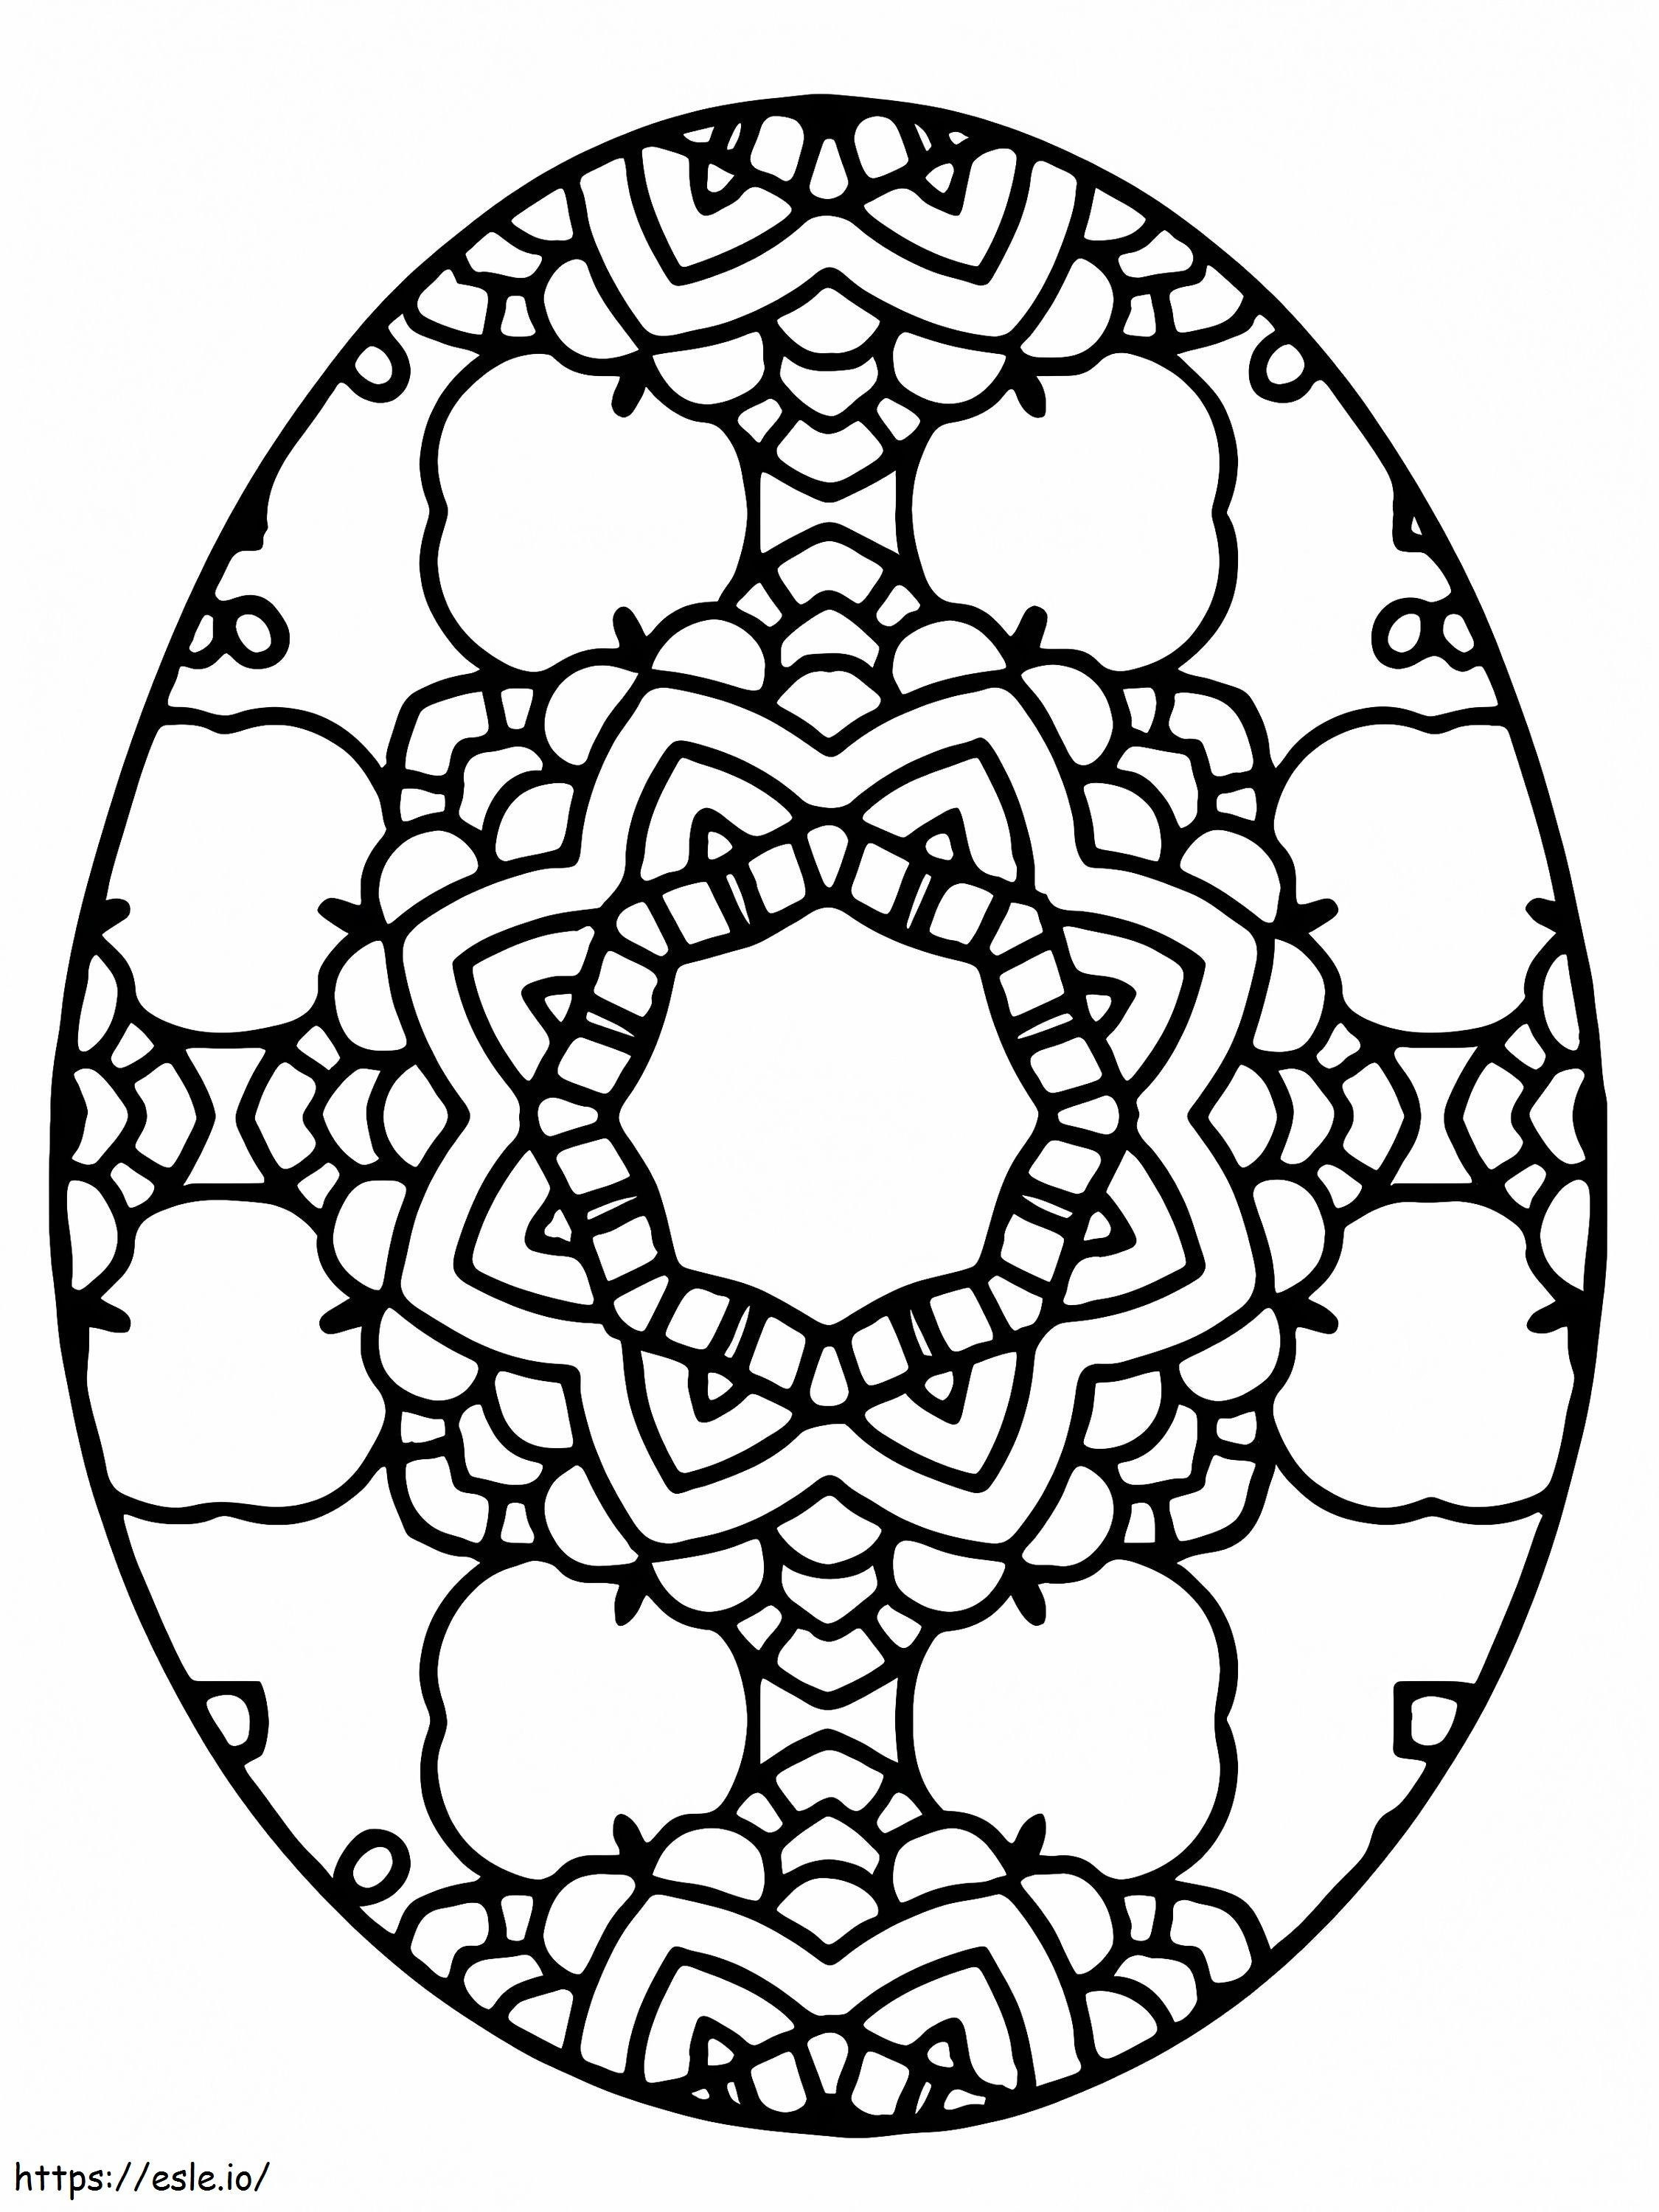 Uncommon Easter Egg coloring page